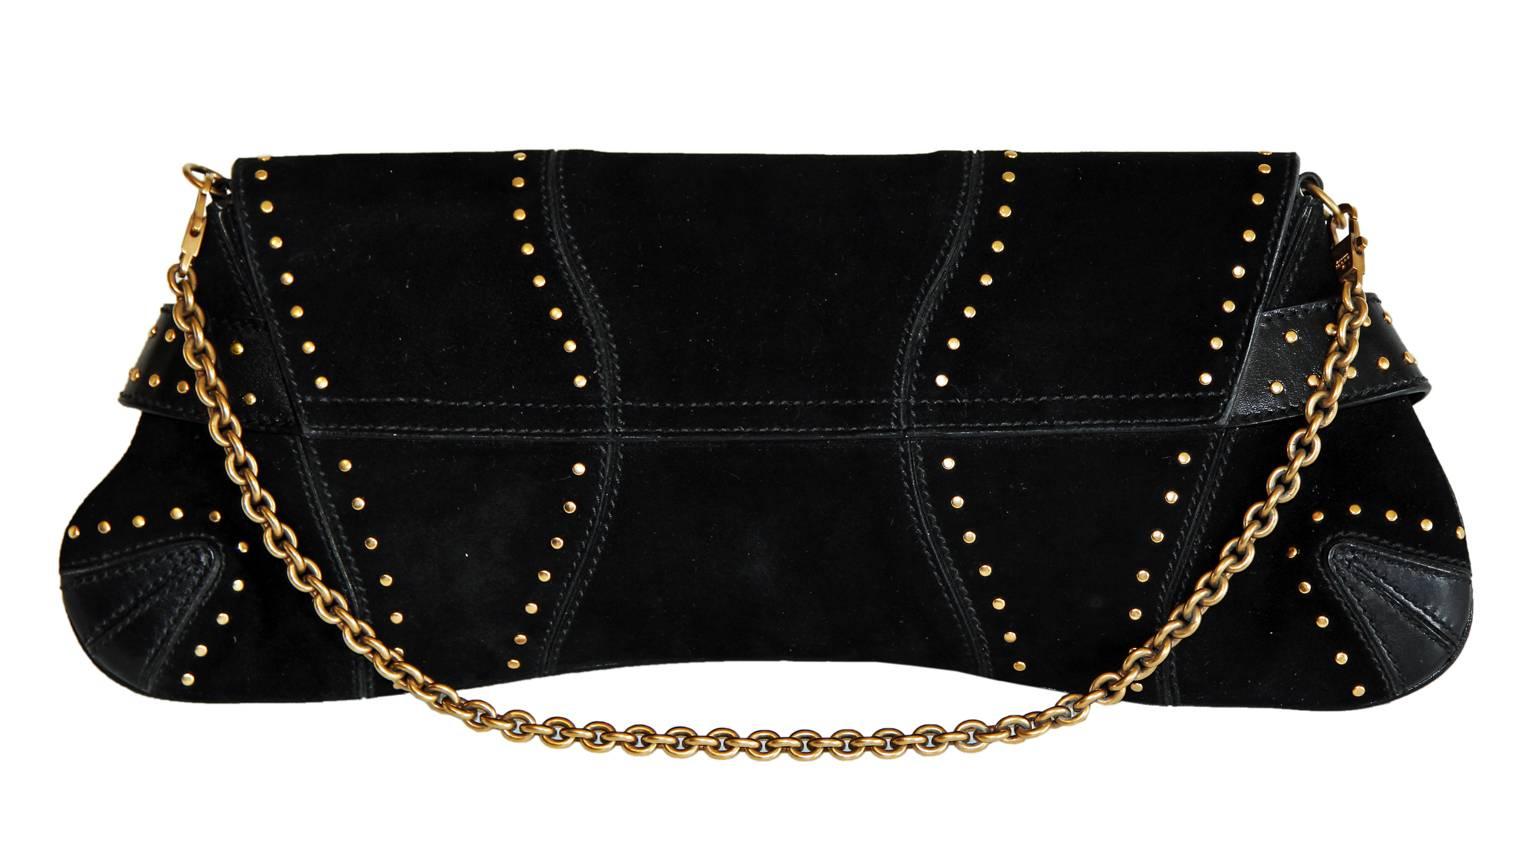 This Incredibly Chic & Edgy Large Studded Horsebit Bag Was The Absolute "IT" Bag From Tom Ford's Fall Winter 2003 Collection For Gucci... Shown On The Runway In The Sexiest Black Python, This Particular Bag Is Made From The Most